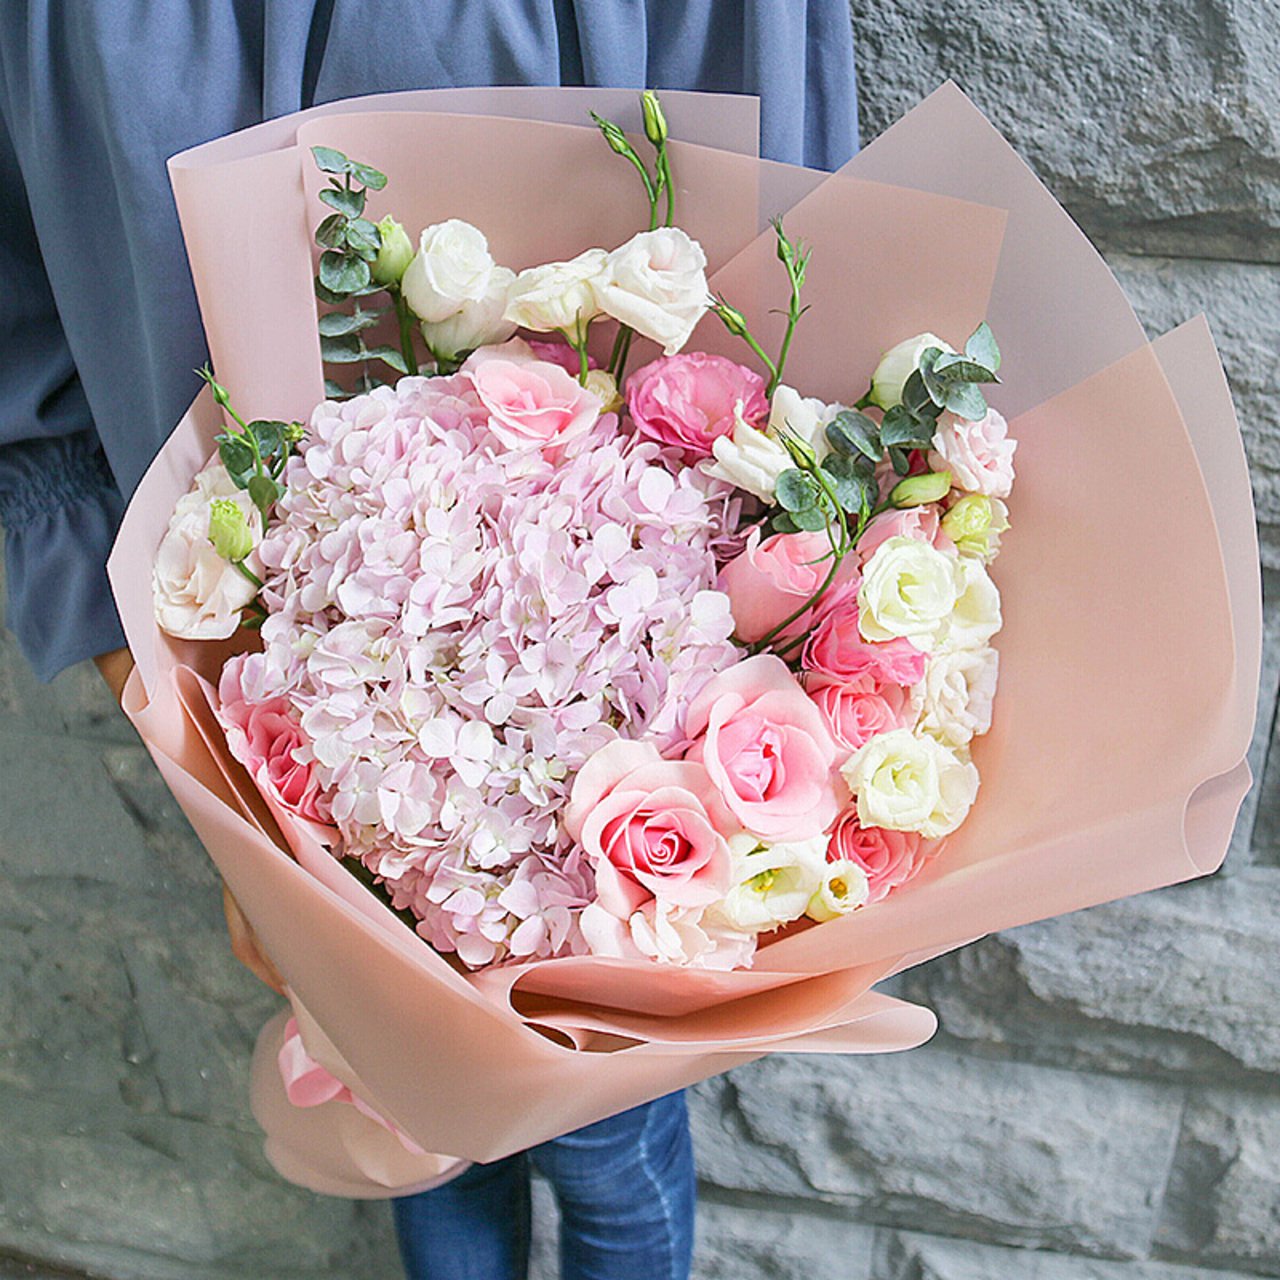 I only love you(
1 pink hydrangea-